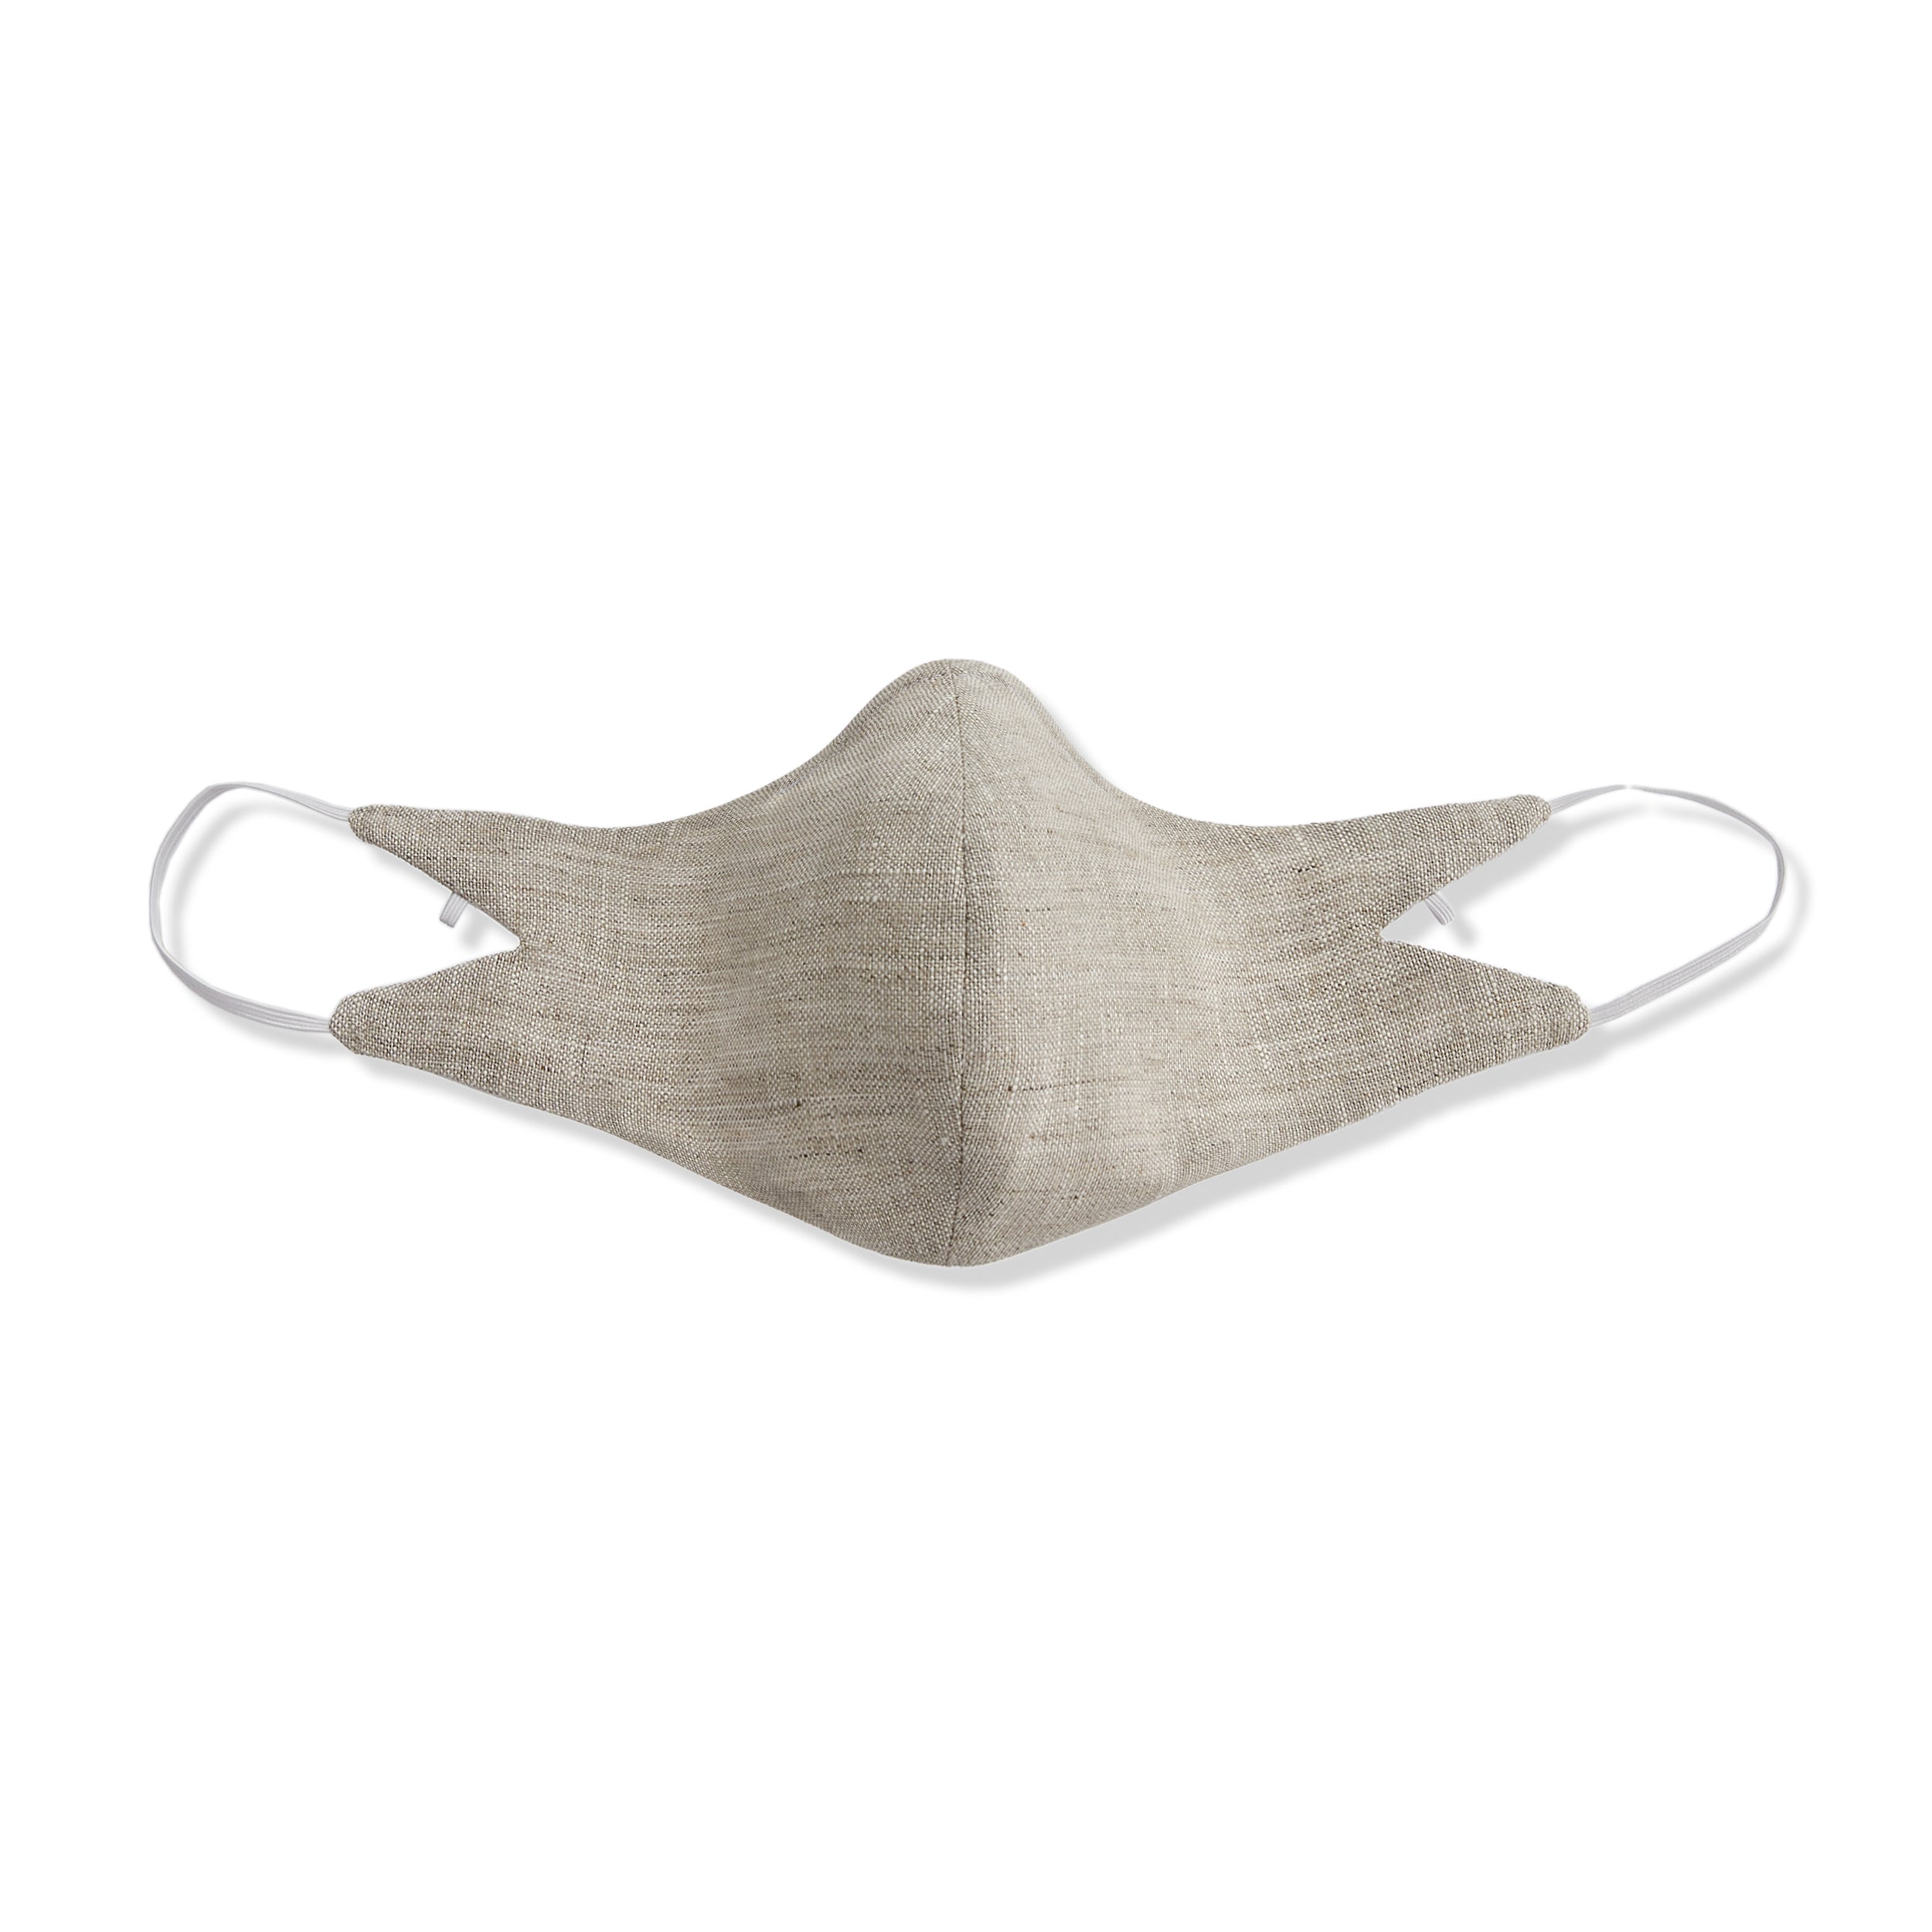 The Tina Mask in Oat (Mask Only, No Chain).